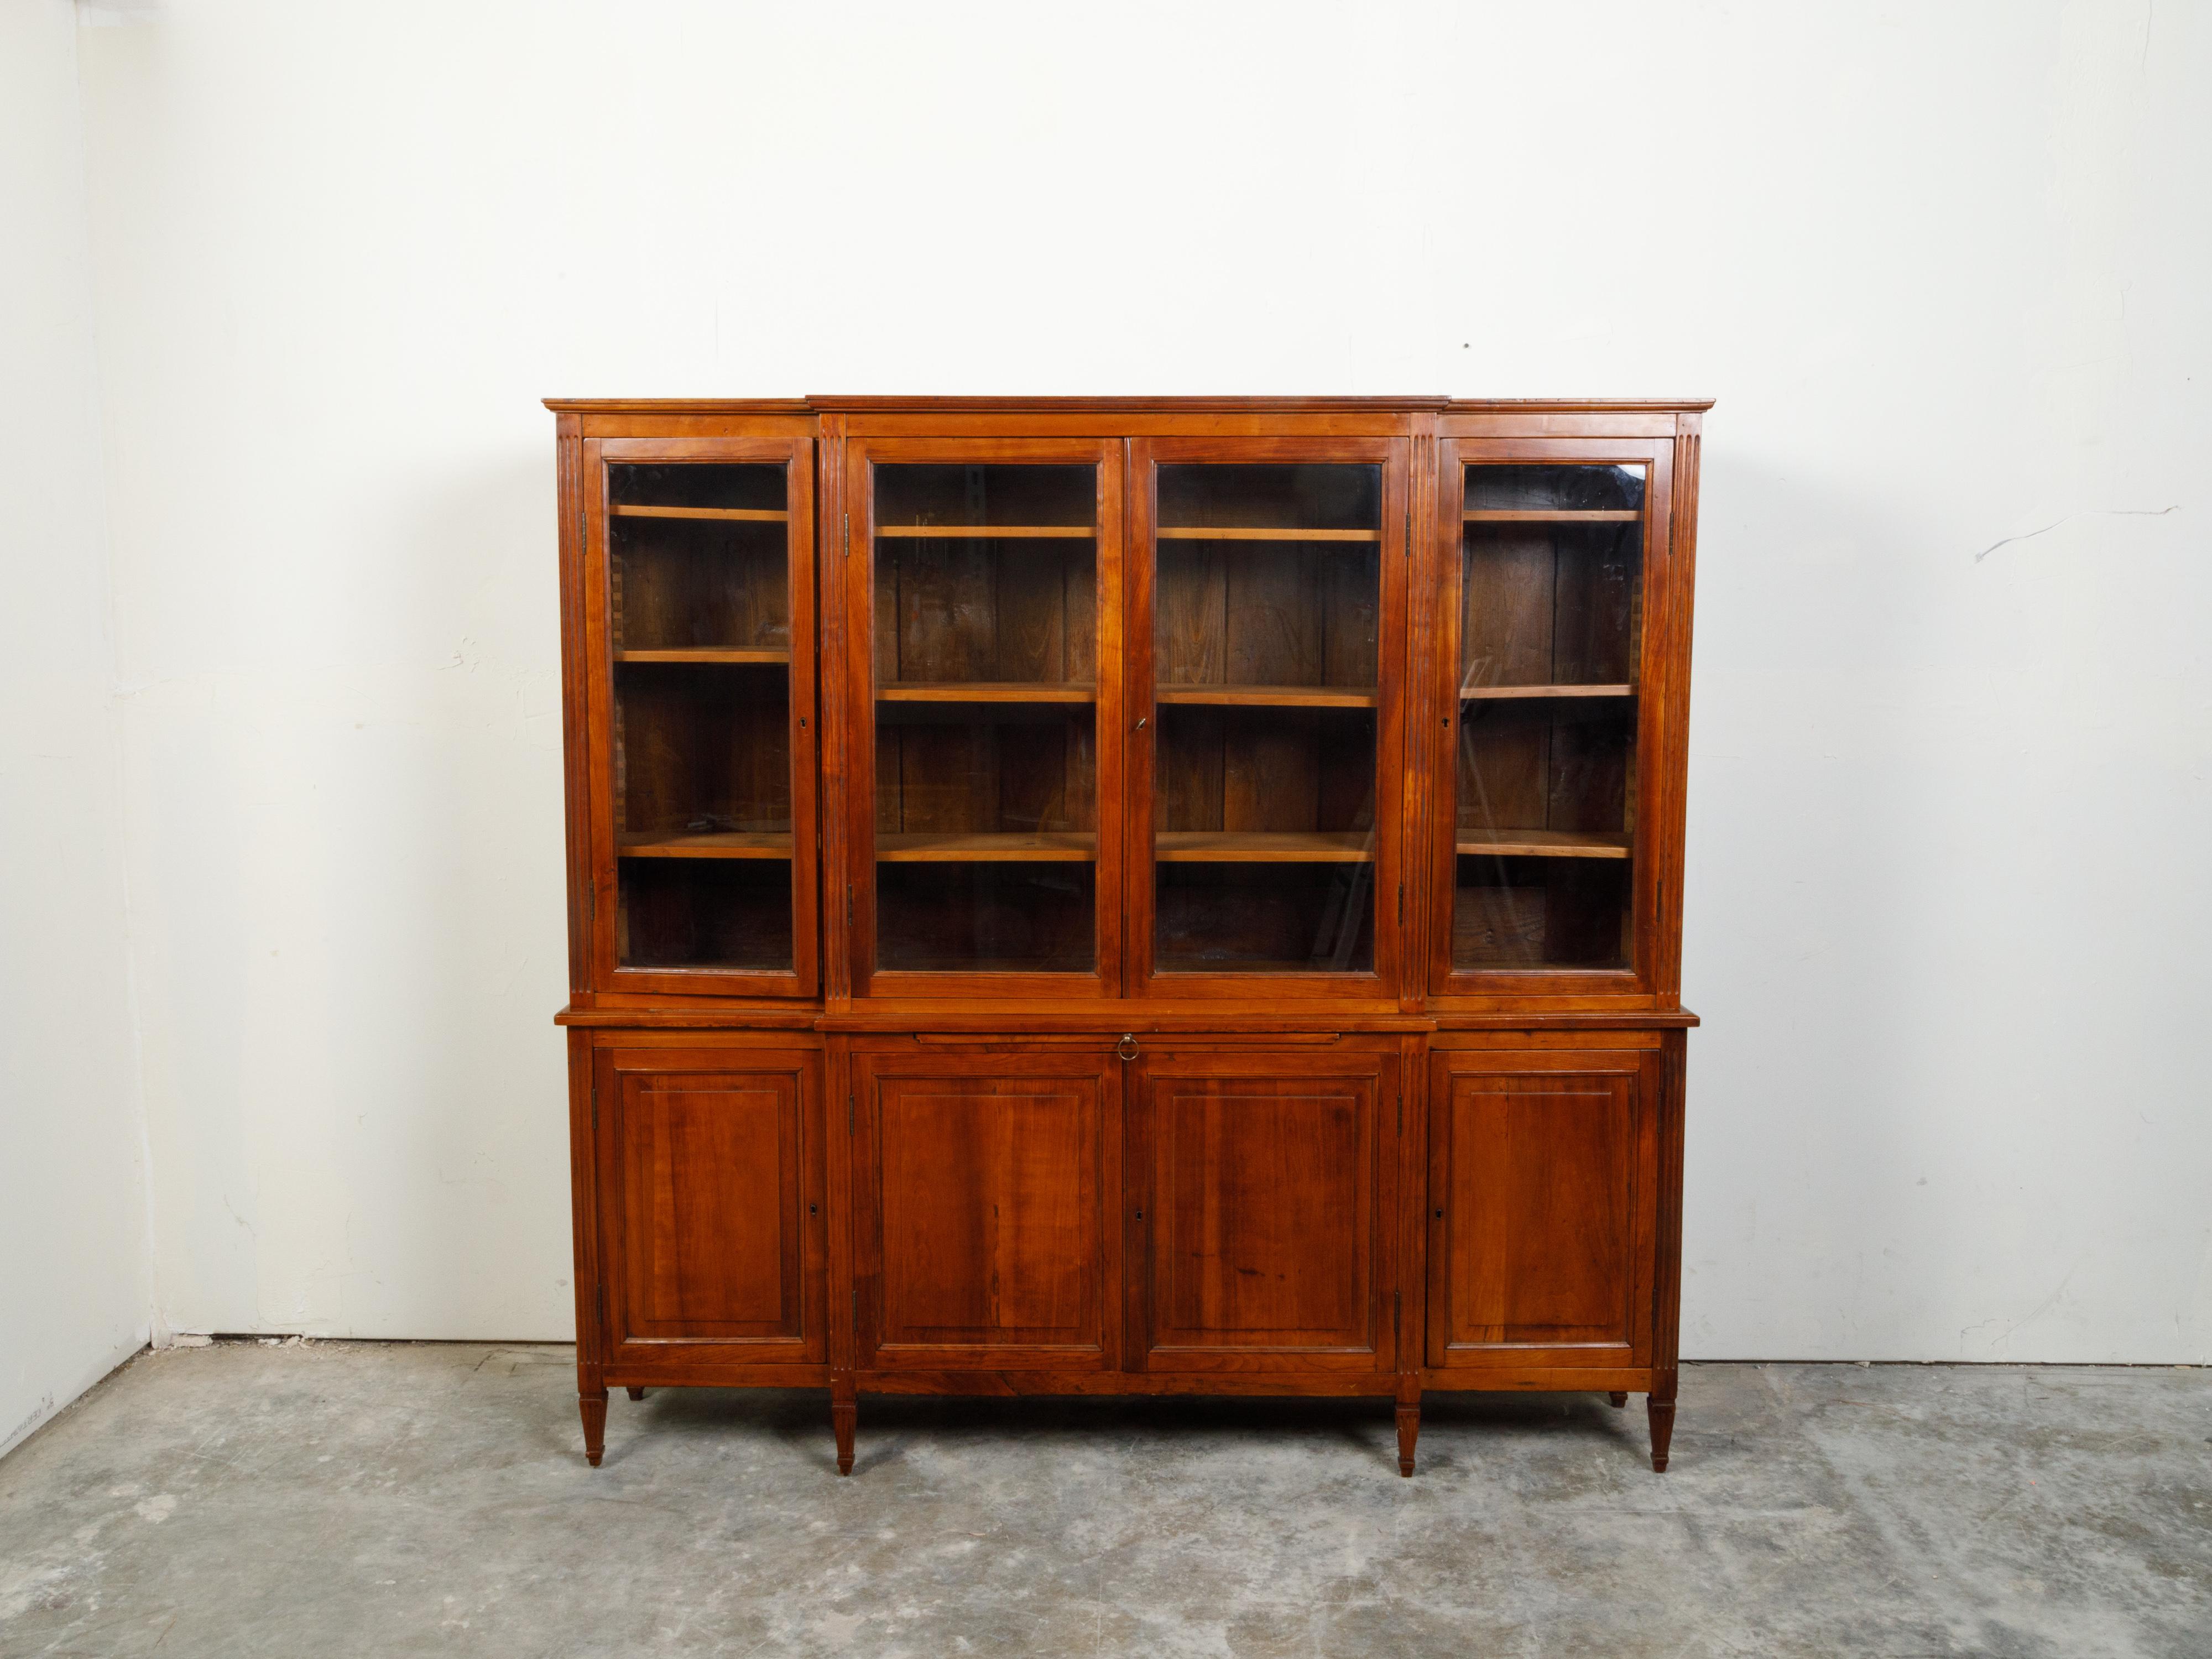 A French Restauration period walnut breakfront bookcase from the early 19th century, with glass doors and fluted accents. Created in France during the first quarter of the 19th century, this breakfront bookcase features four glass doors in its upper